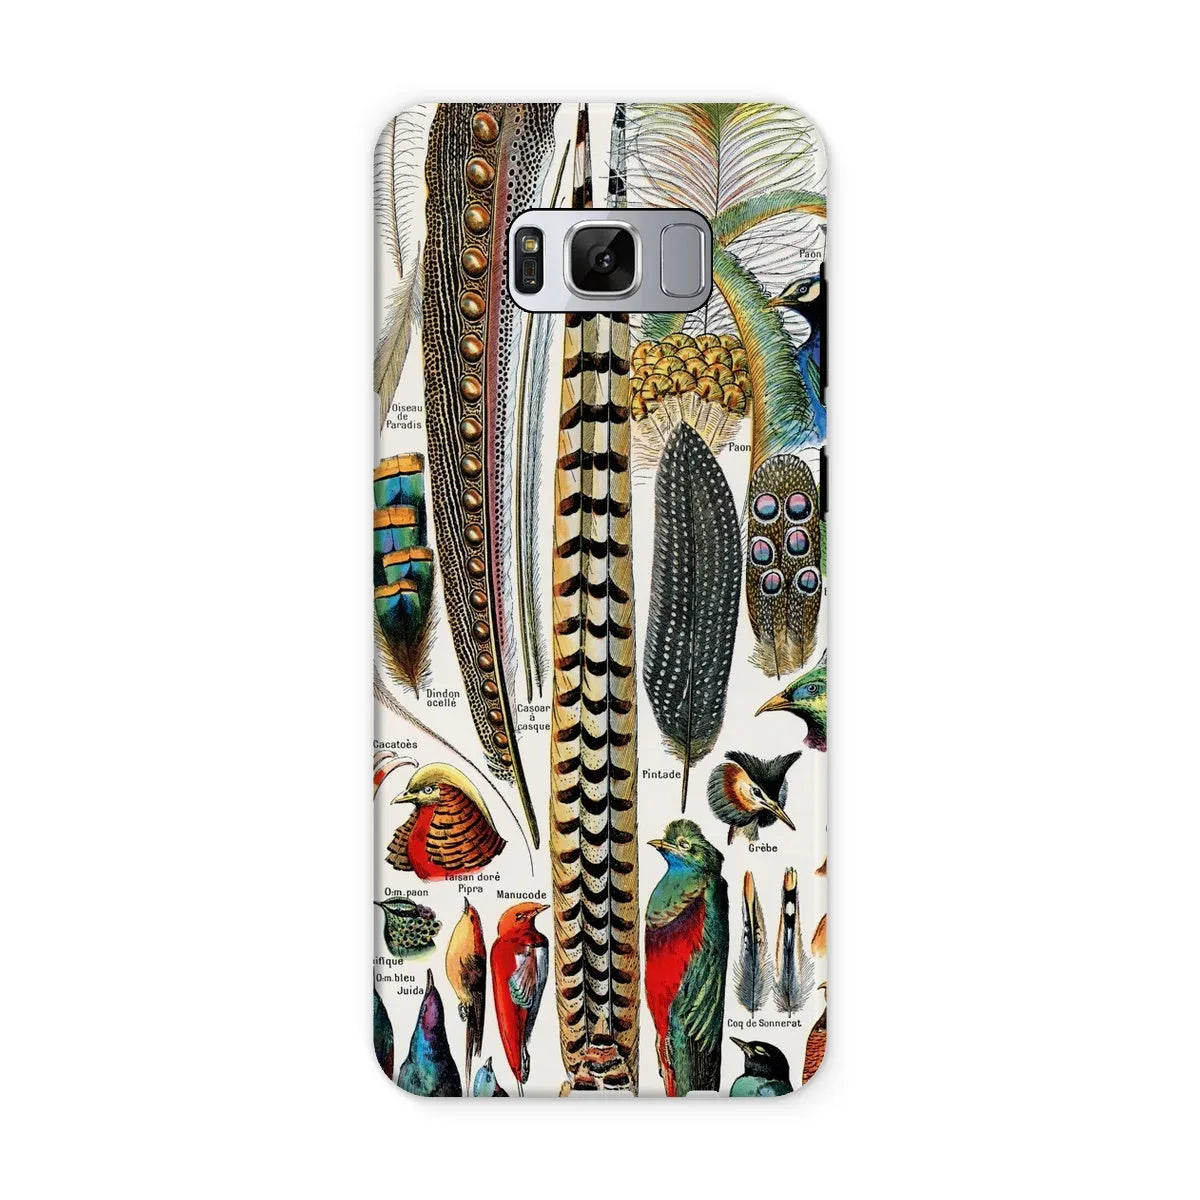 Plumes - Feathers By Adolphe Millot Tough Phone Case - Samsung Galaxy S8 / Matte - Aesthetic Art